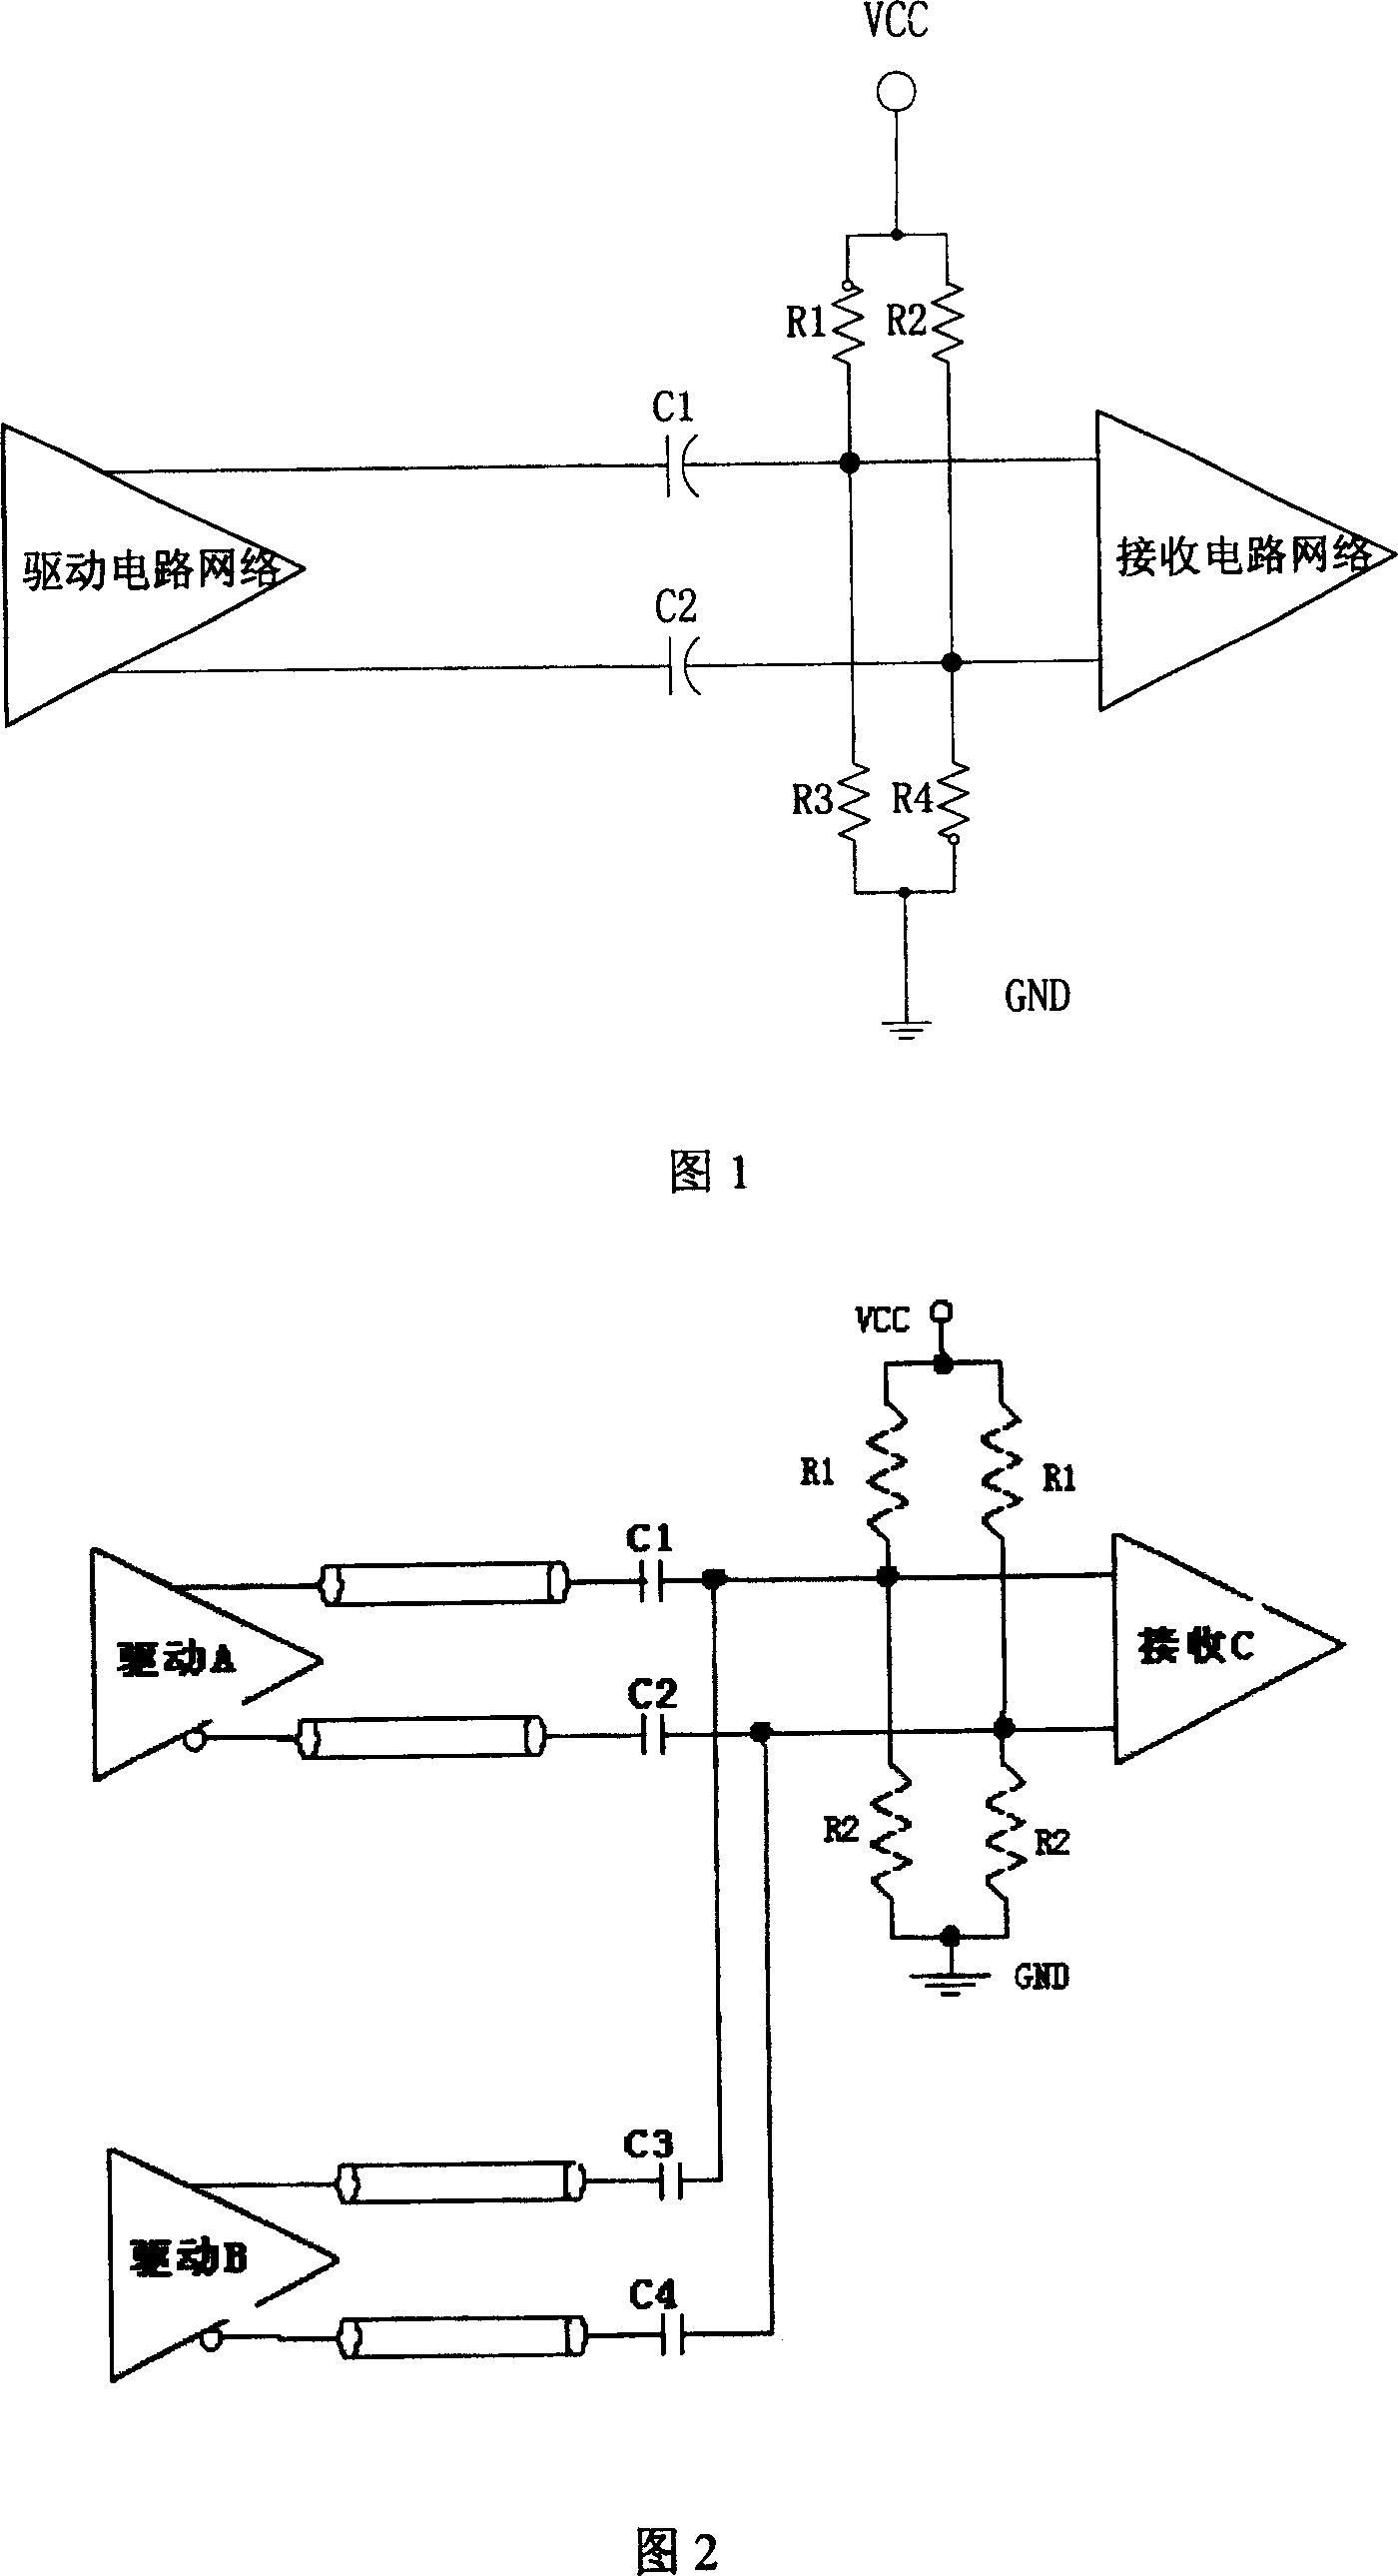 A differential interconnection circuit